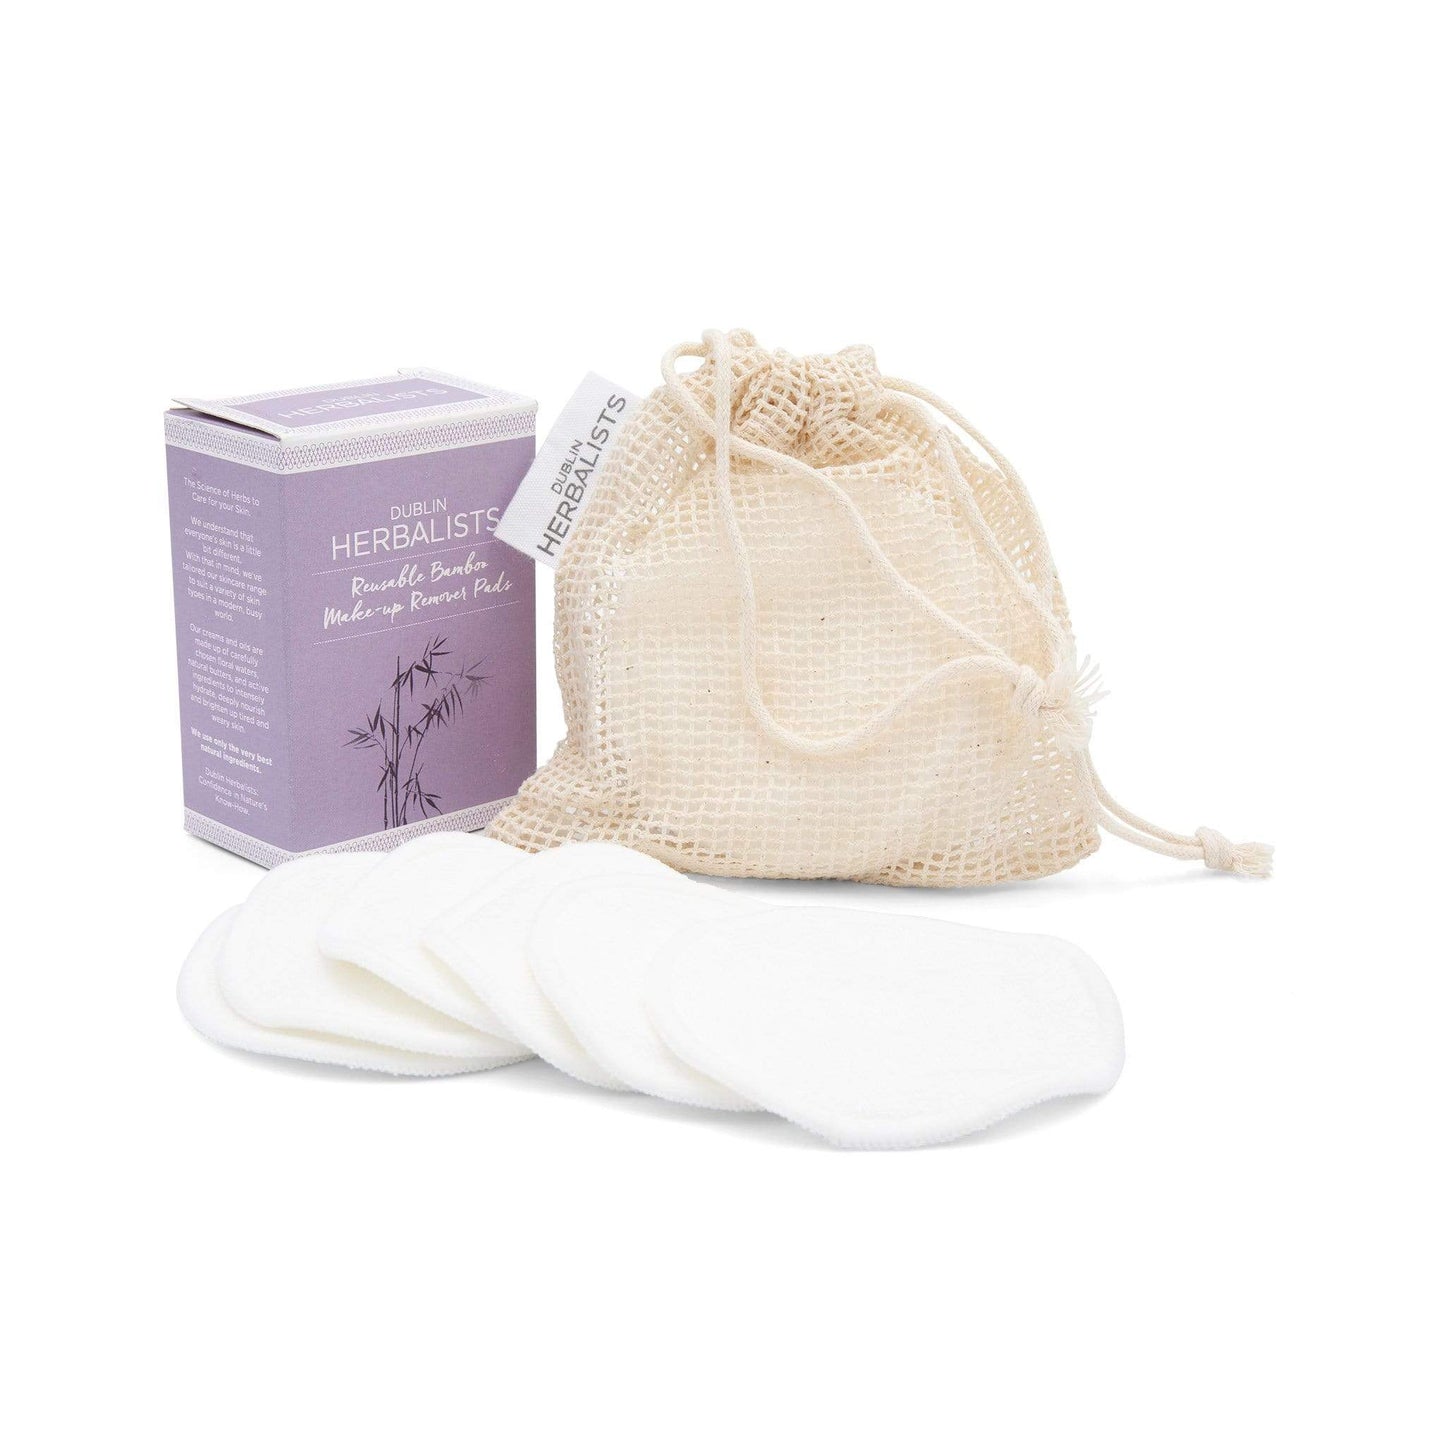 Dublin Herbalists Skincare Reusable Bamboo & Cotton Makeup Remover Pads - Dublin Herbalists